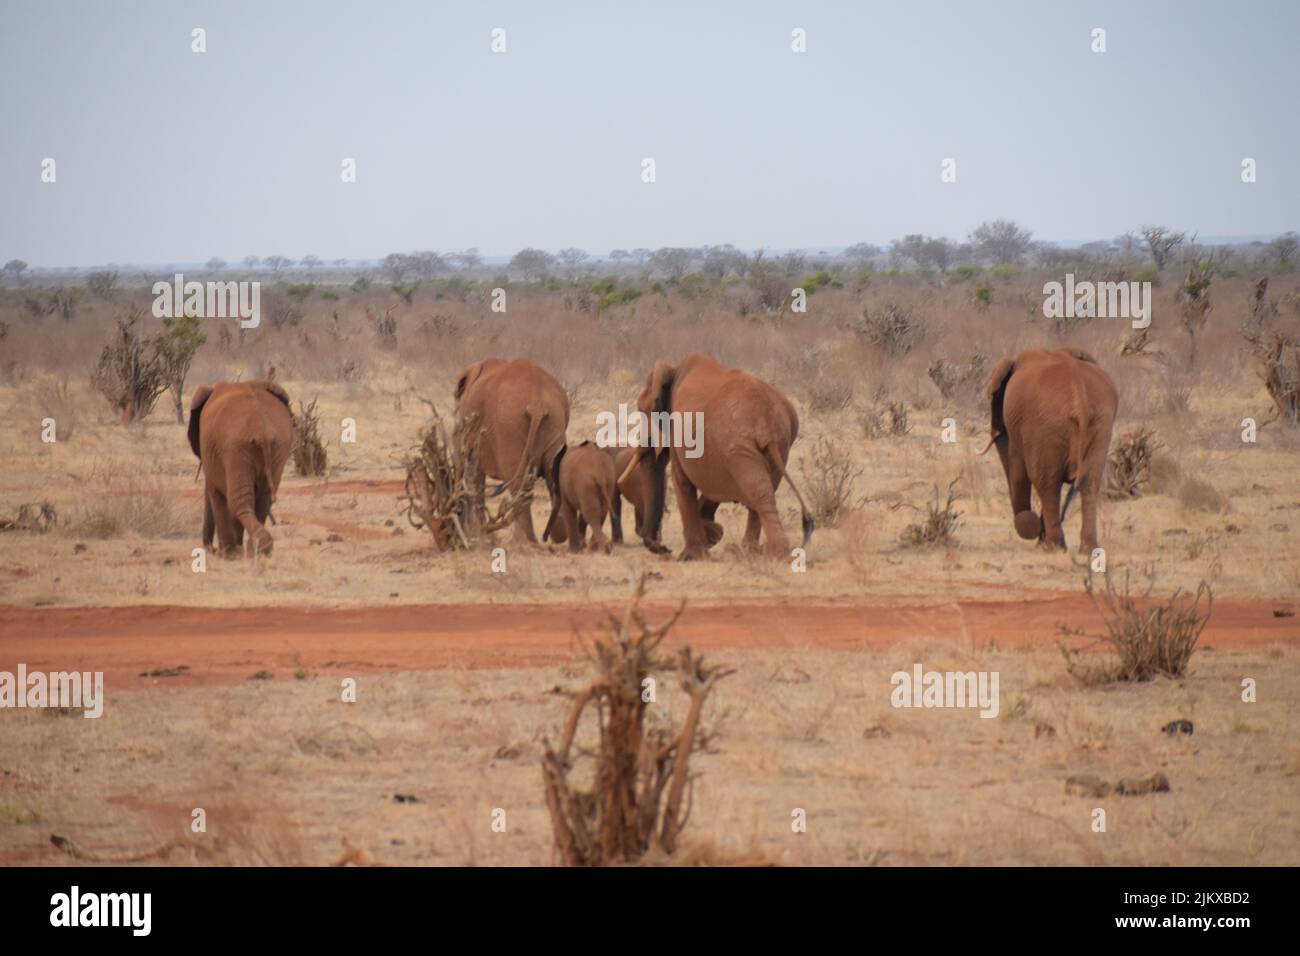 A family of elephants following a trail In Tsavo East National Park Stock Photo